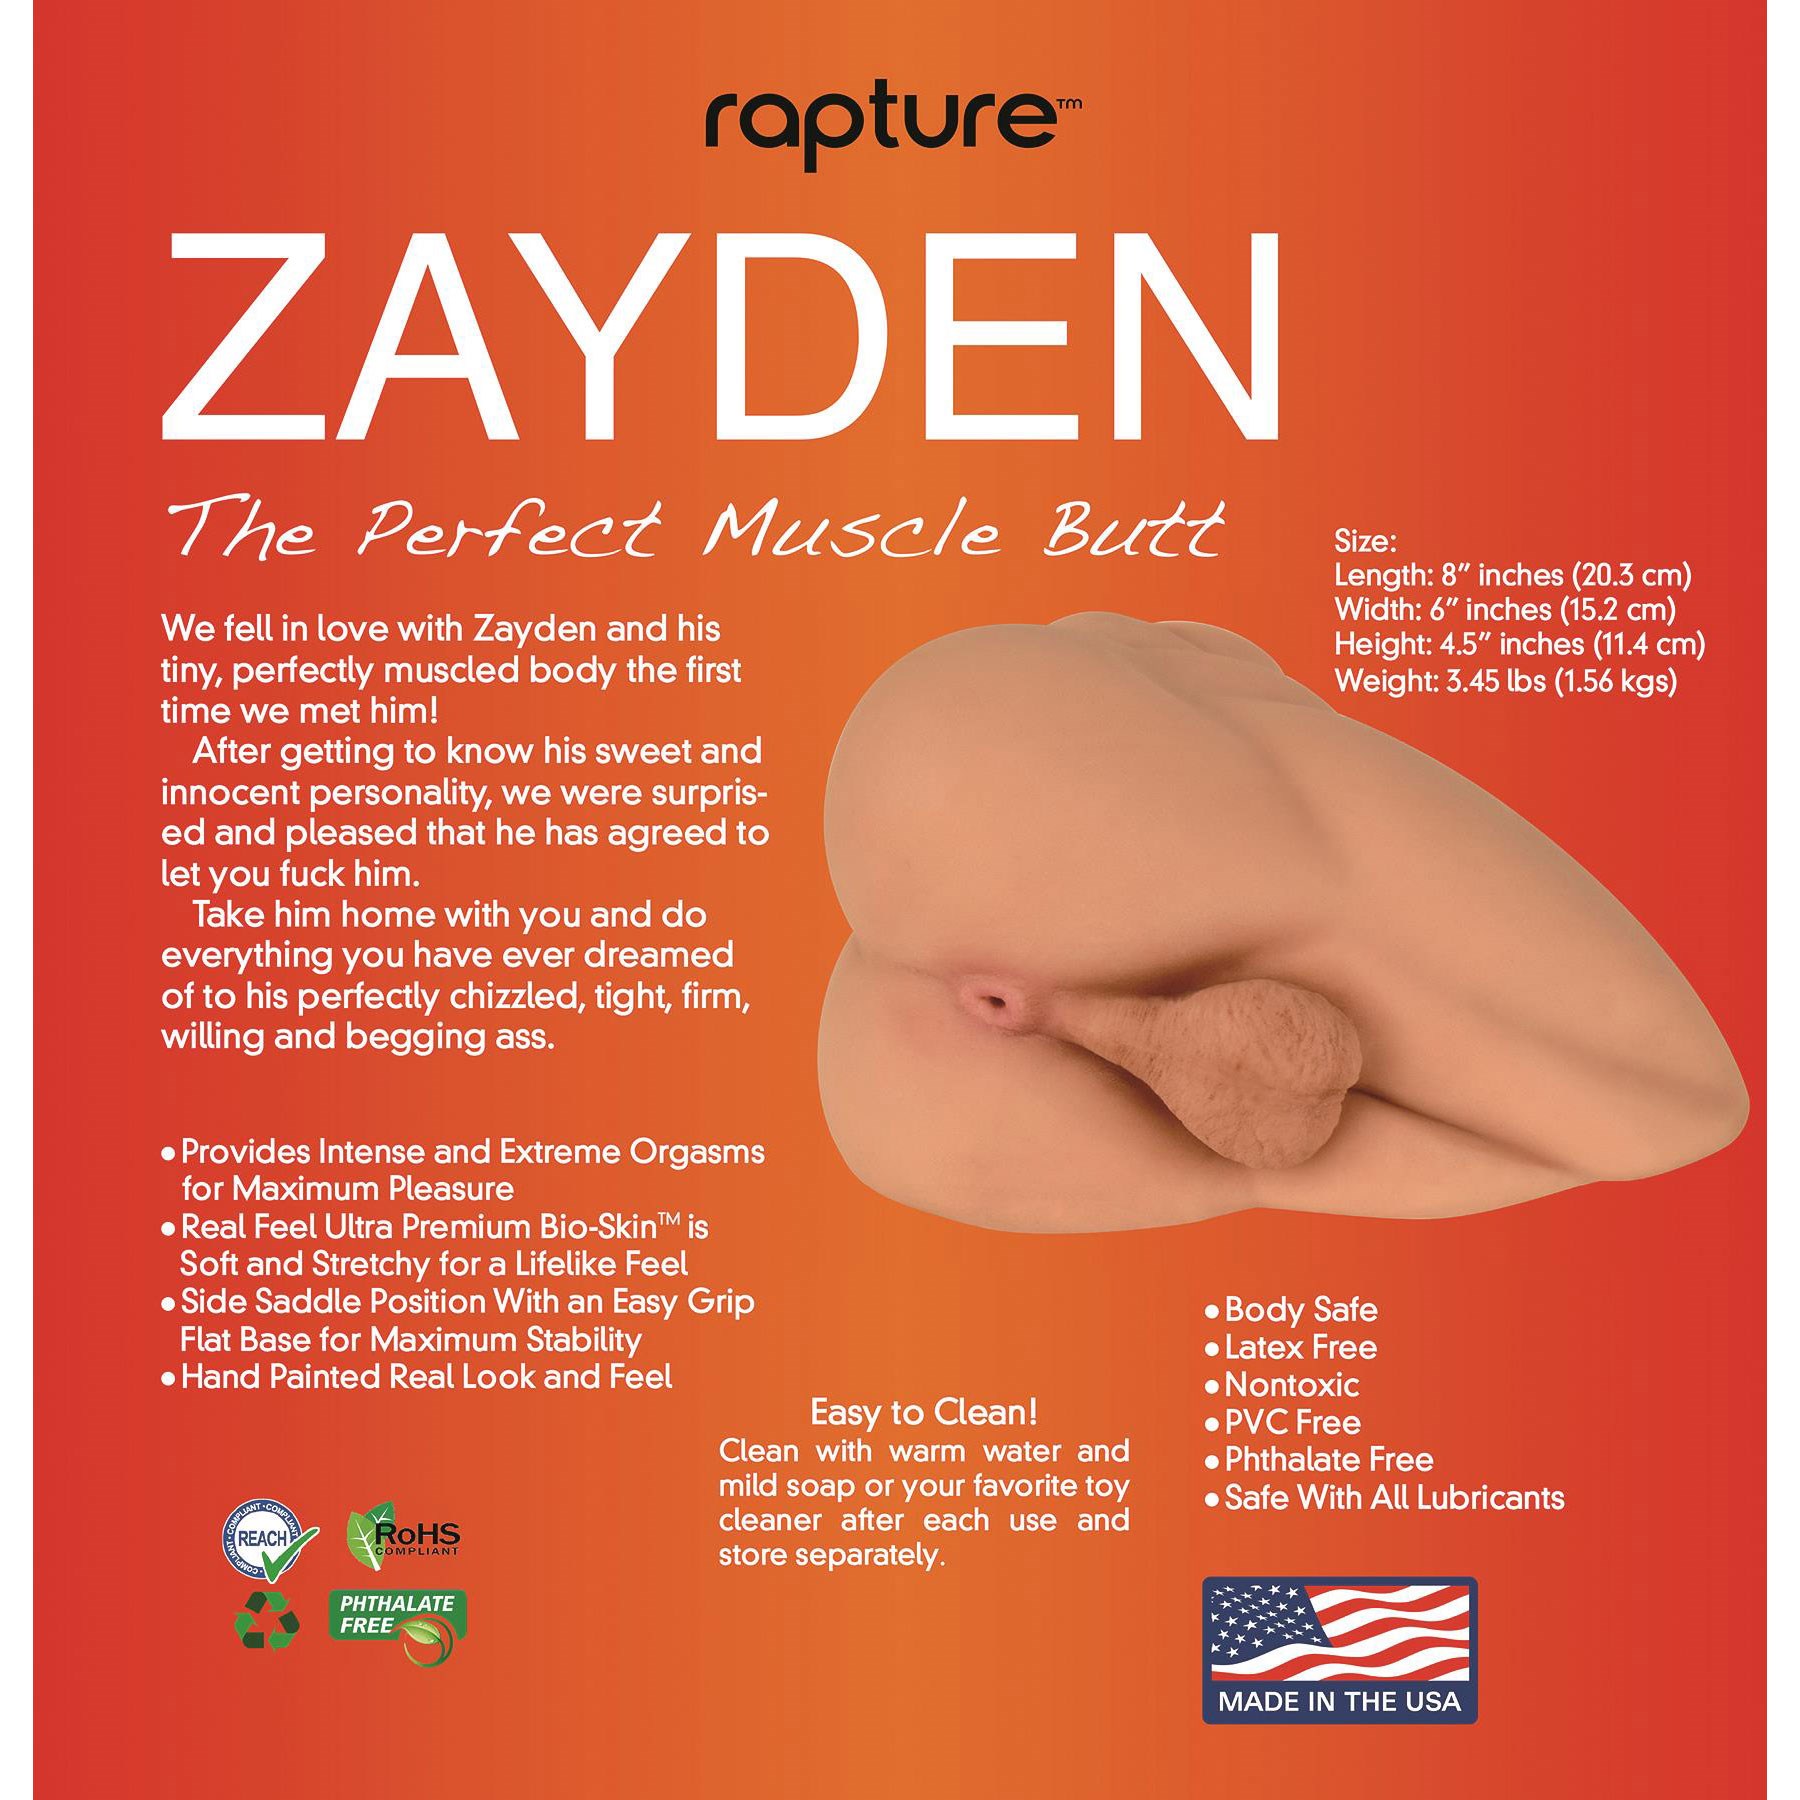 Zayden The Perfect Muscle Butt instructions